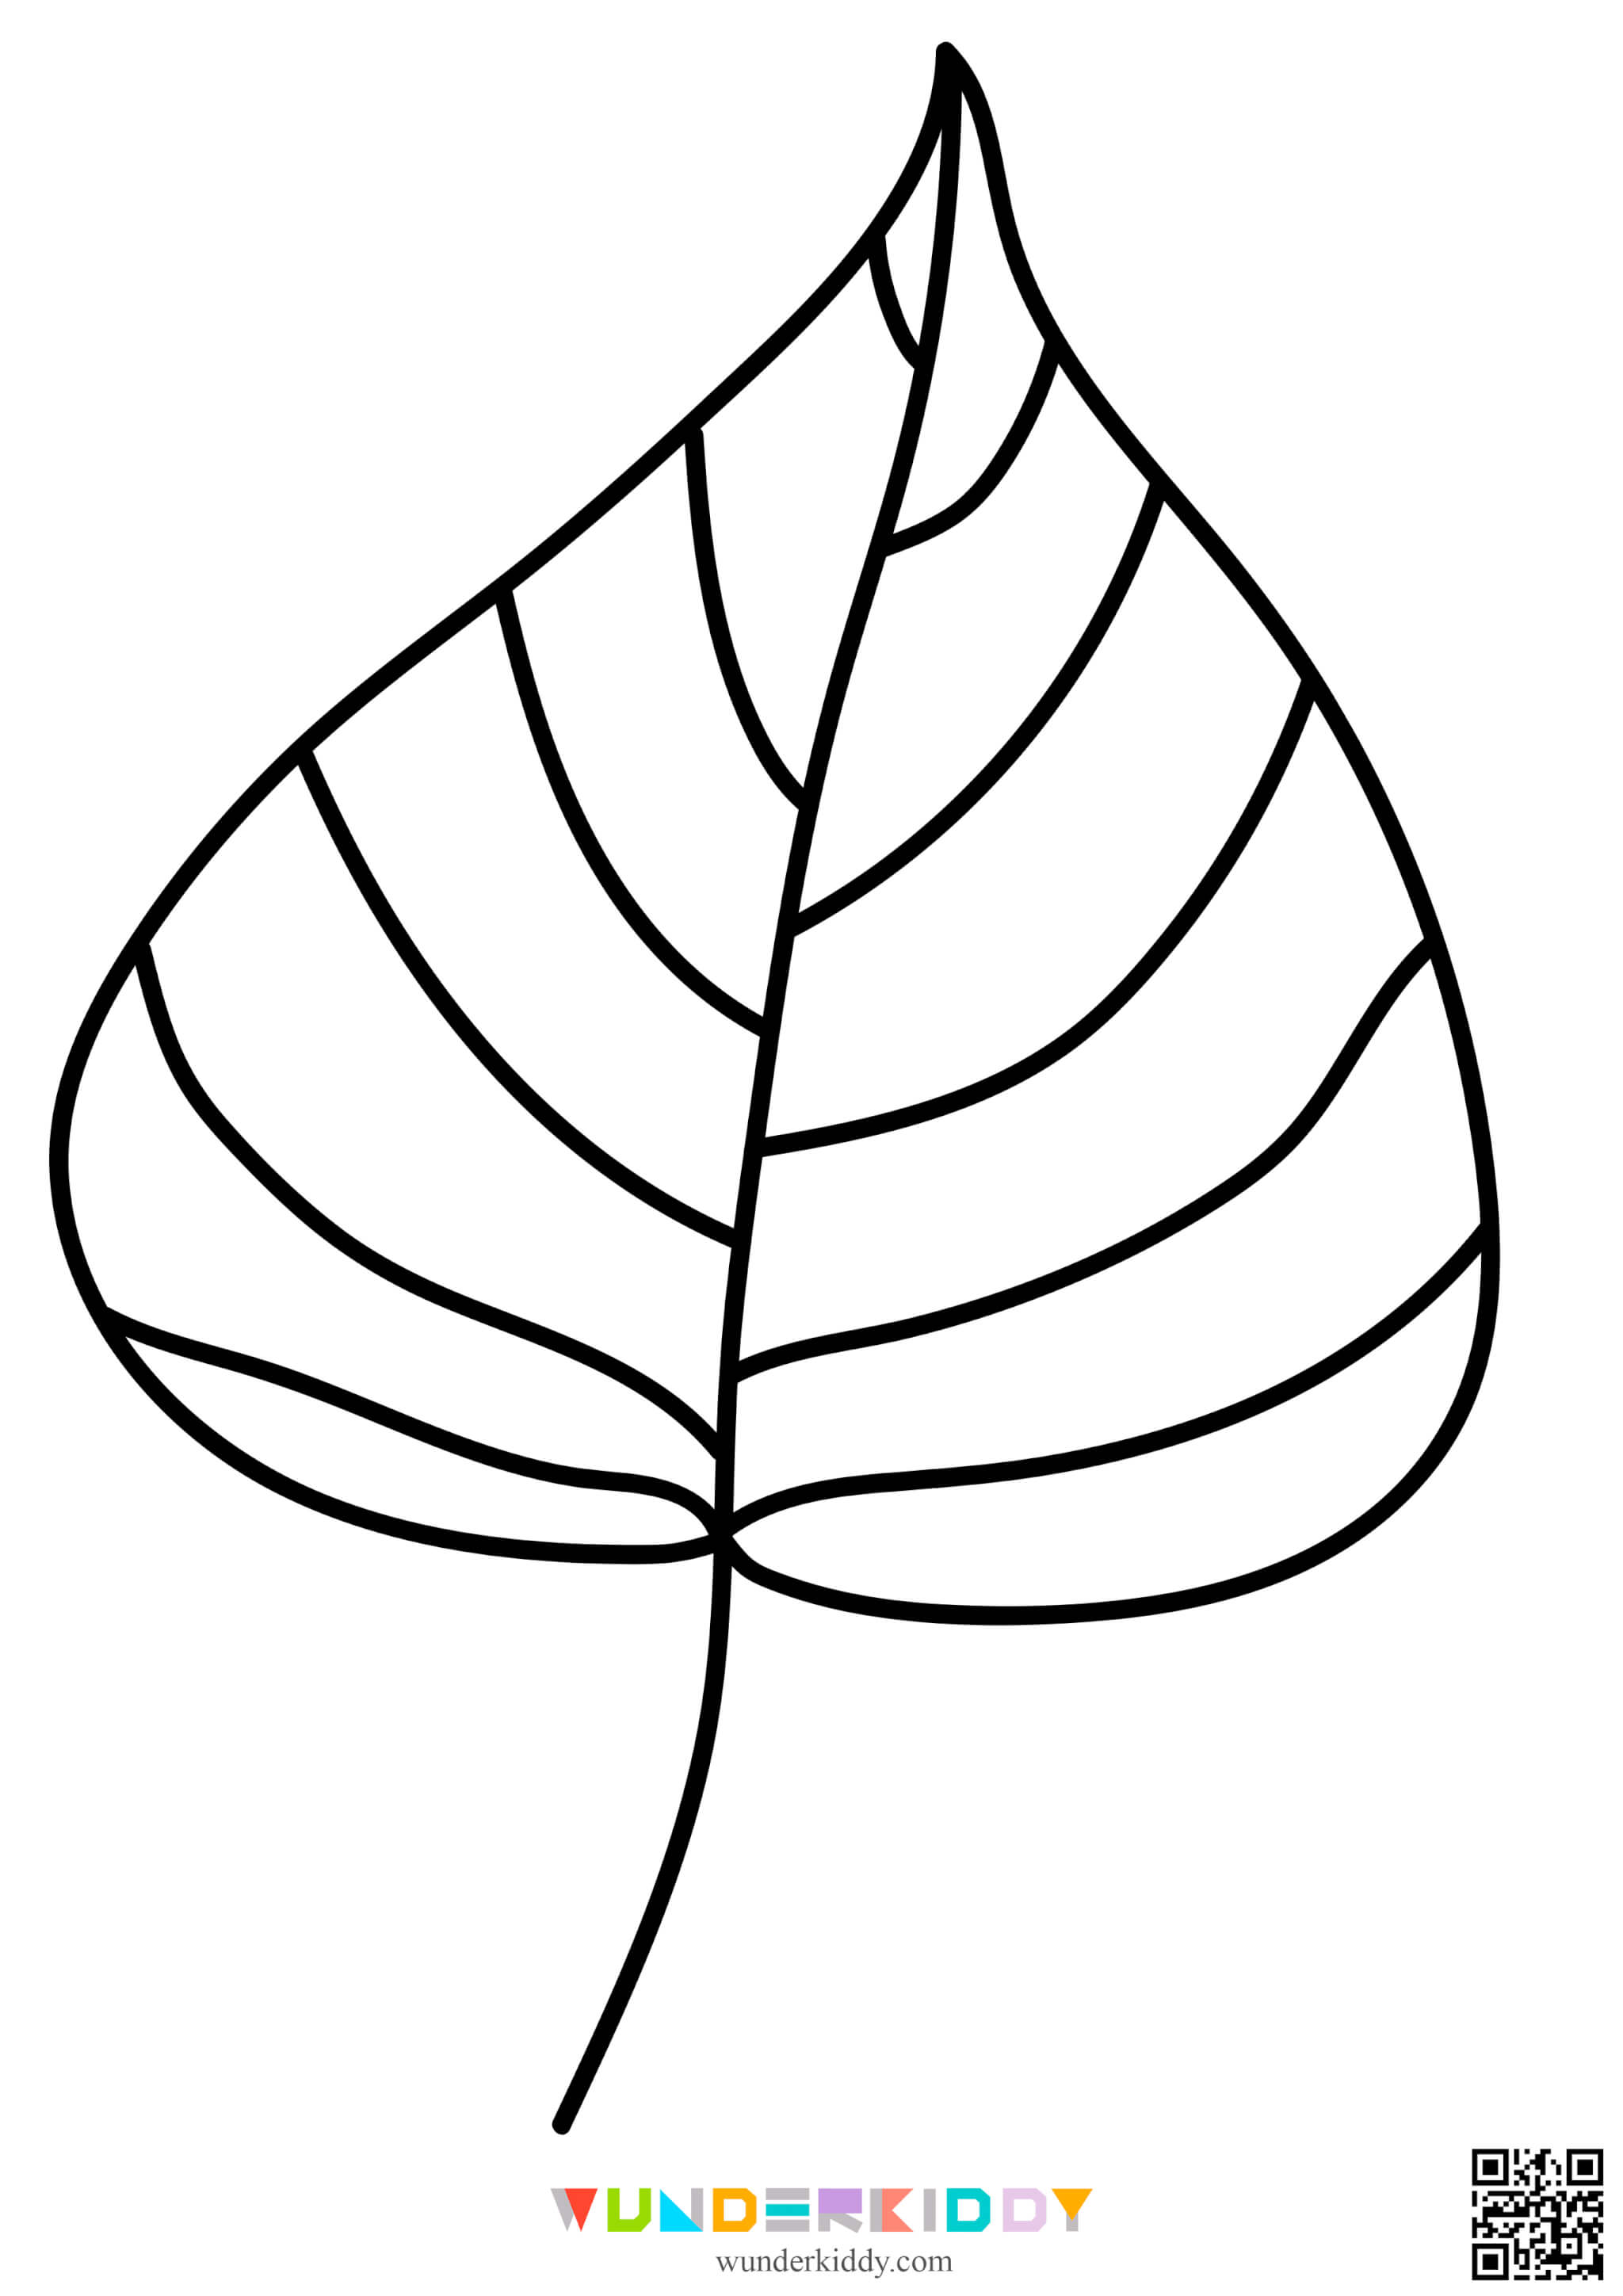 Fall Leaves Template - Image 3